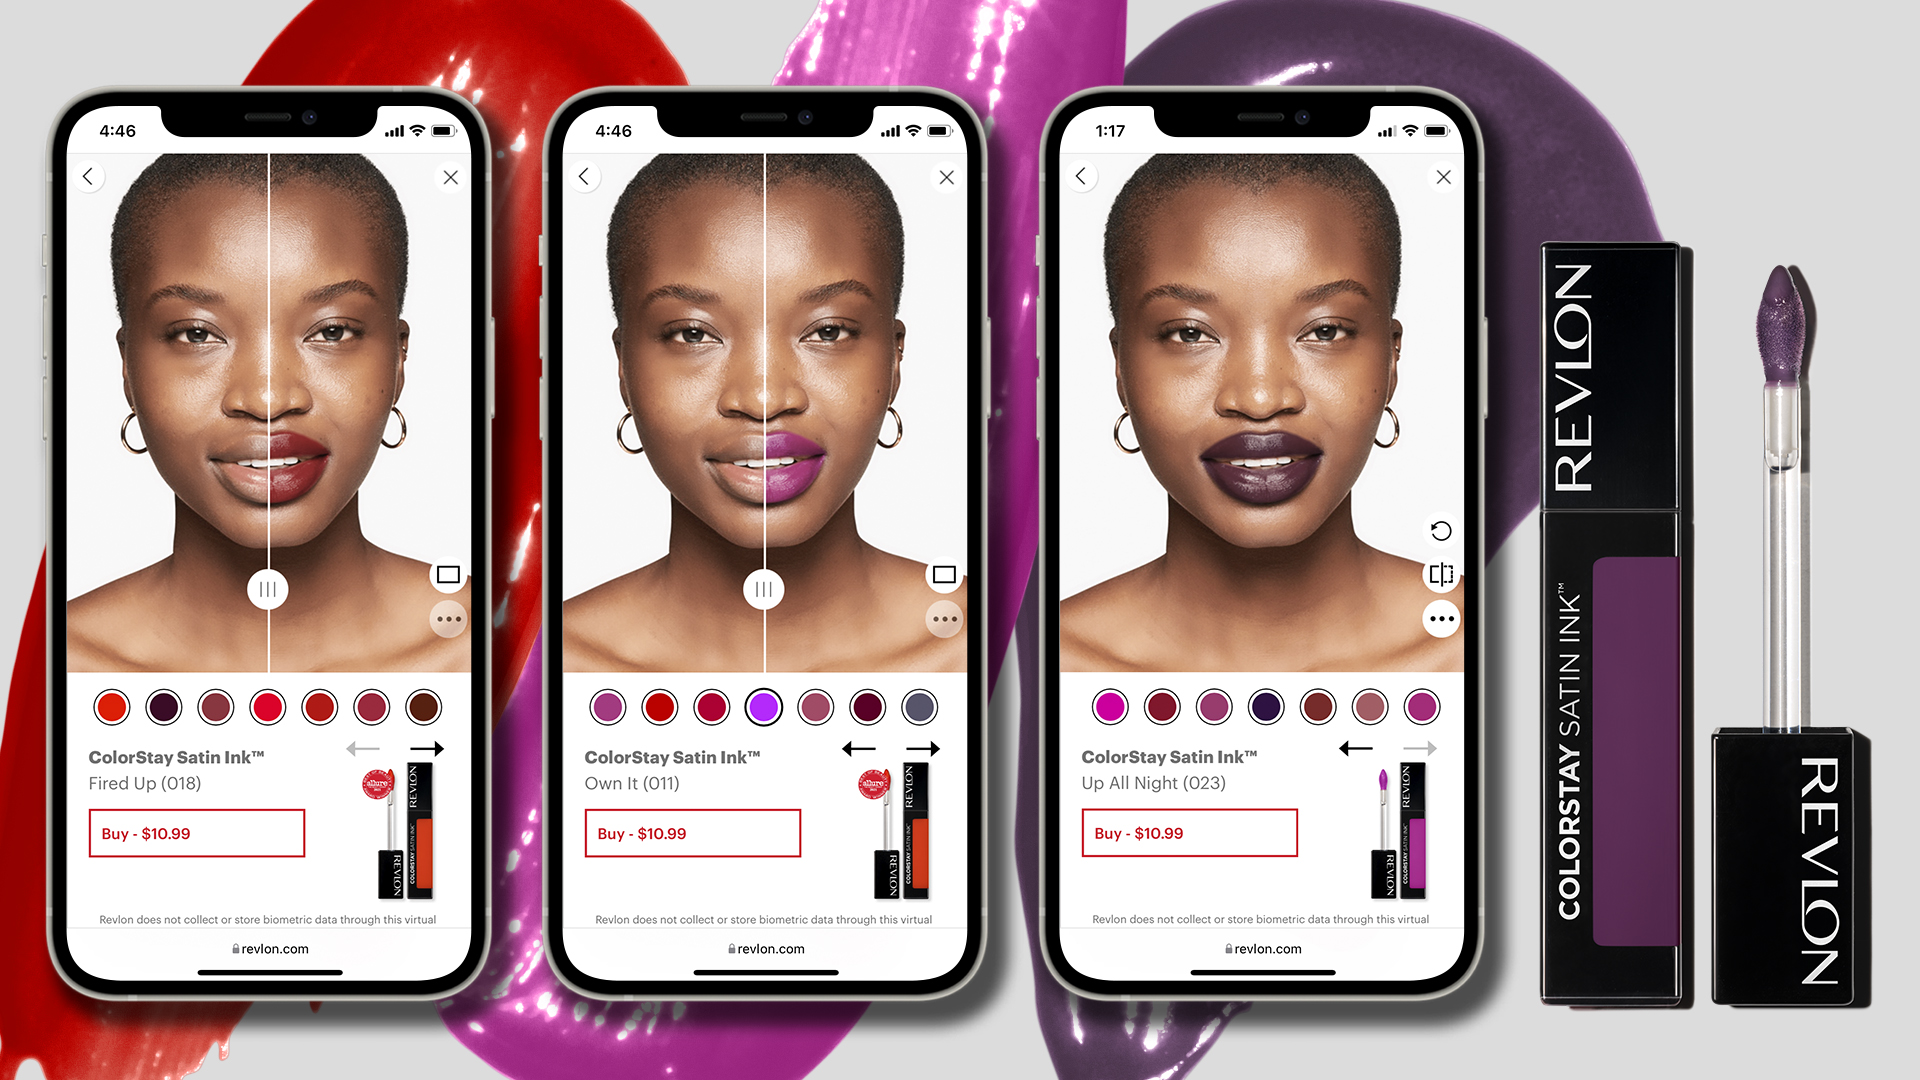 Virtual Try-On: How To Use It - Revlon